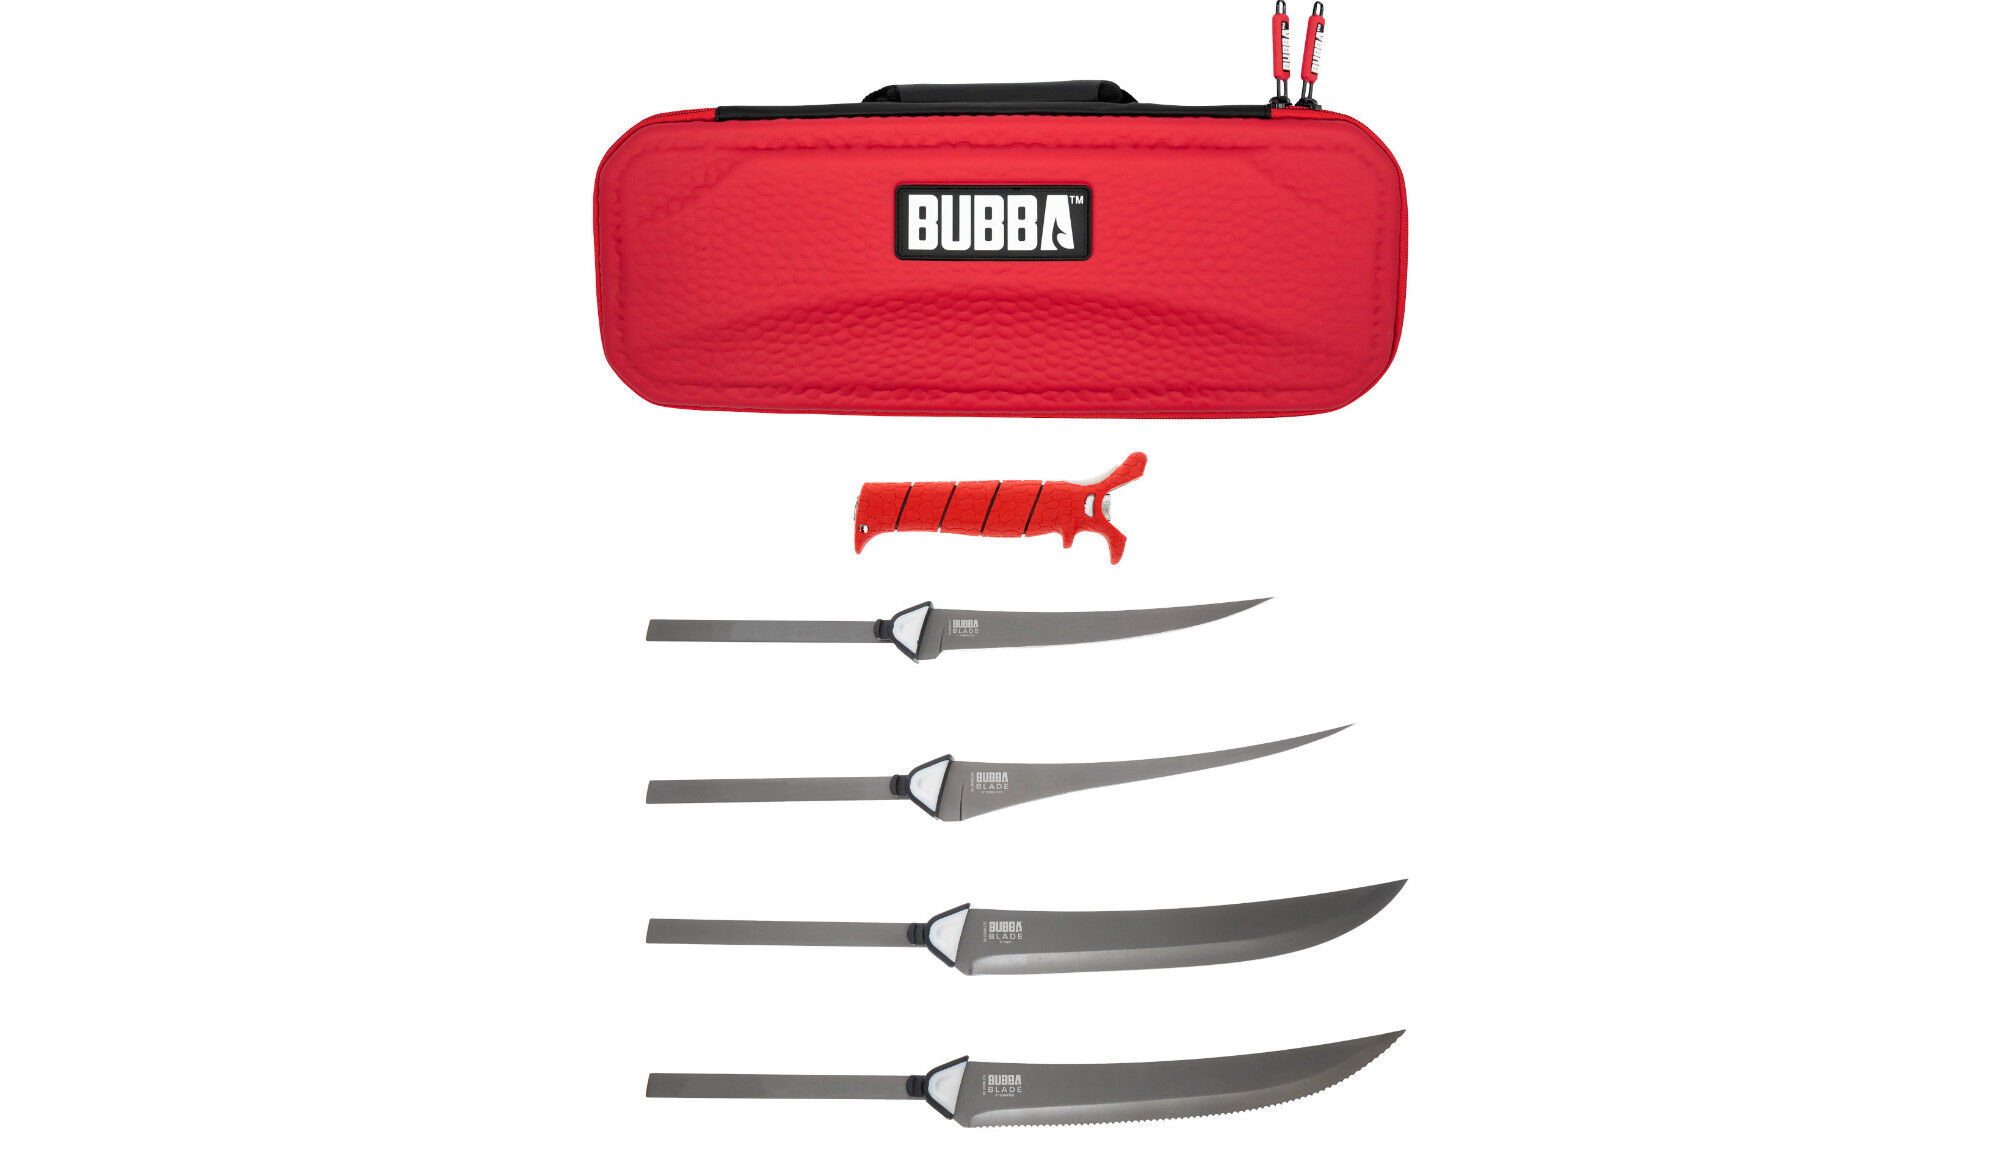 Win A Dexter Fish Filleting Knife And Tool Set! - On The Water